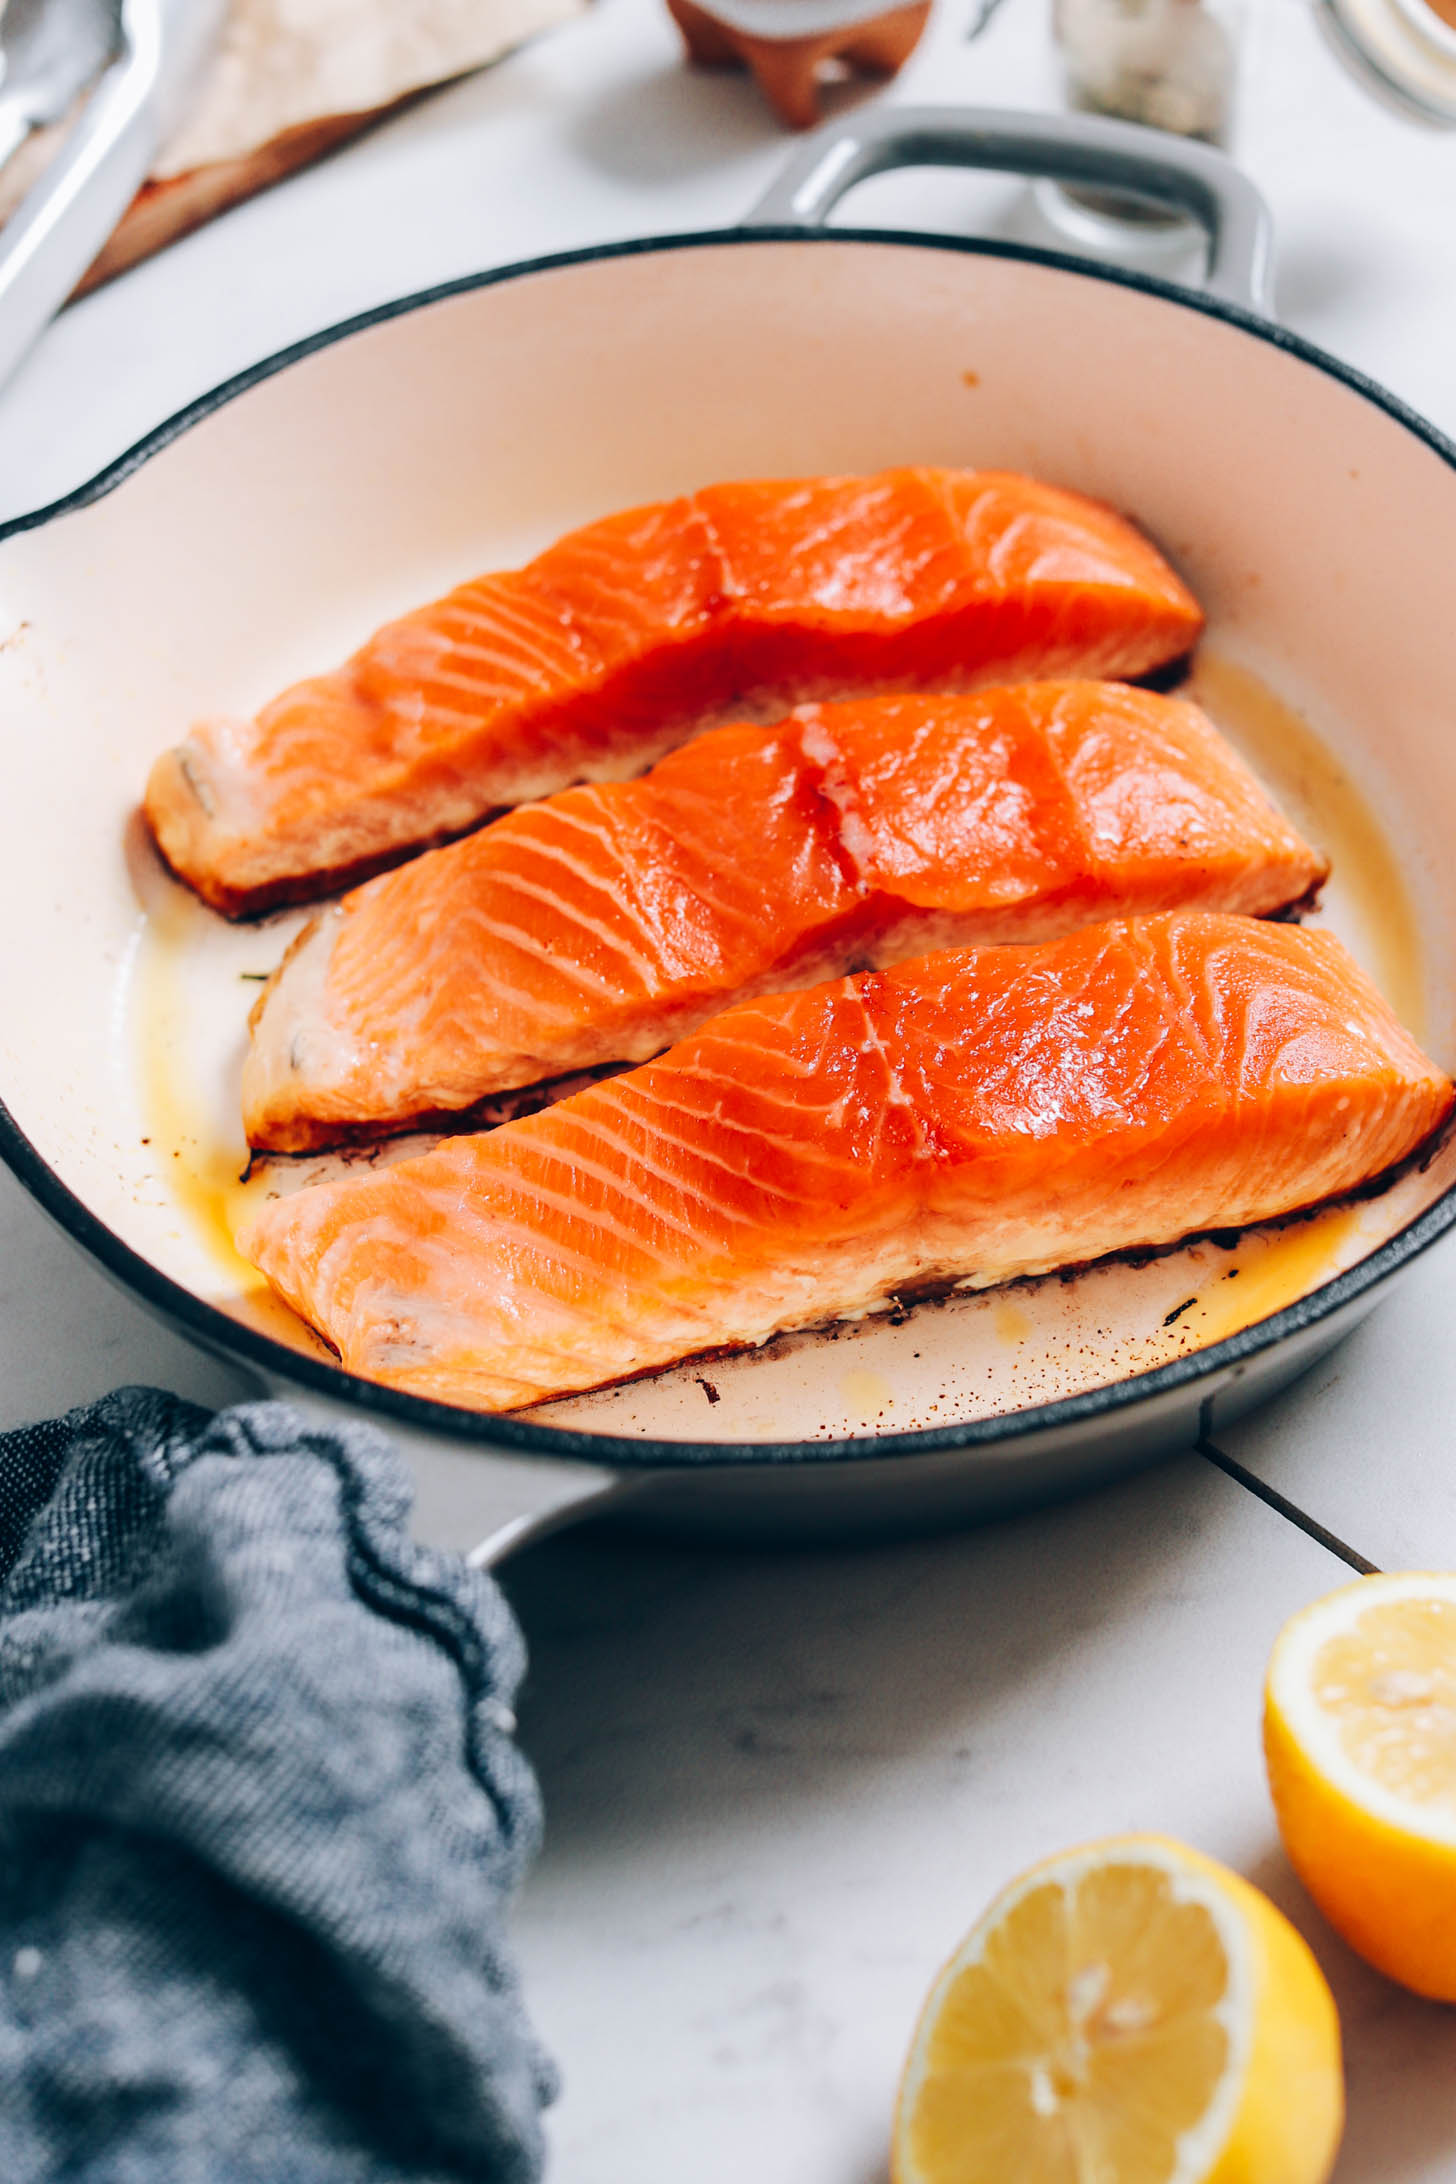 Partially cooked salmon filets in an enameled cast iron skillet